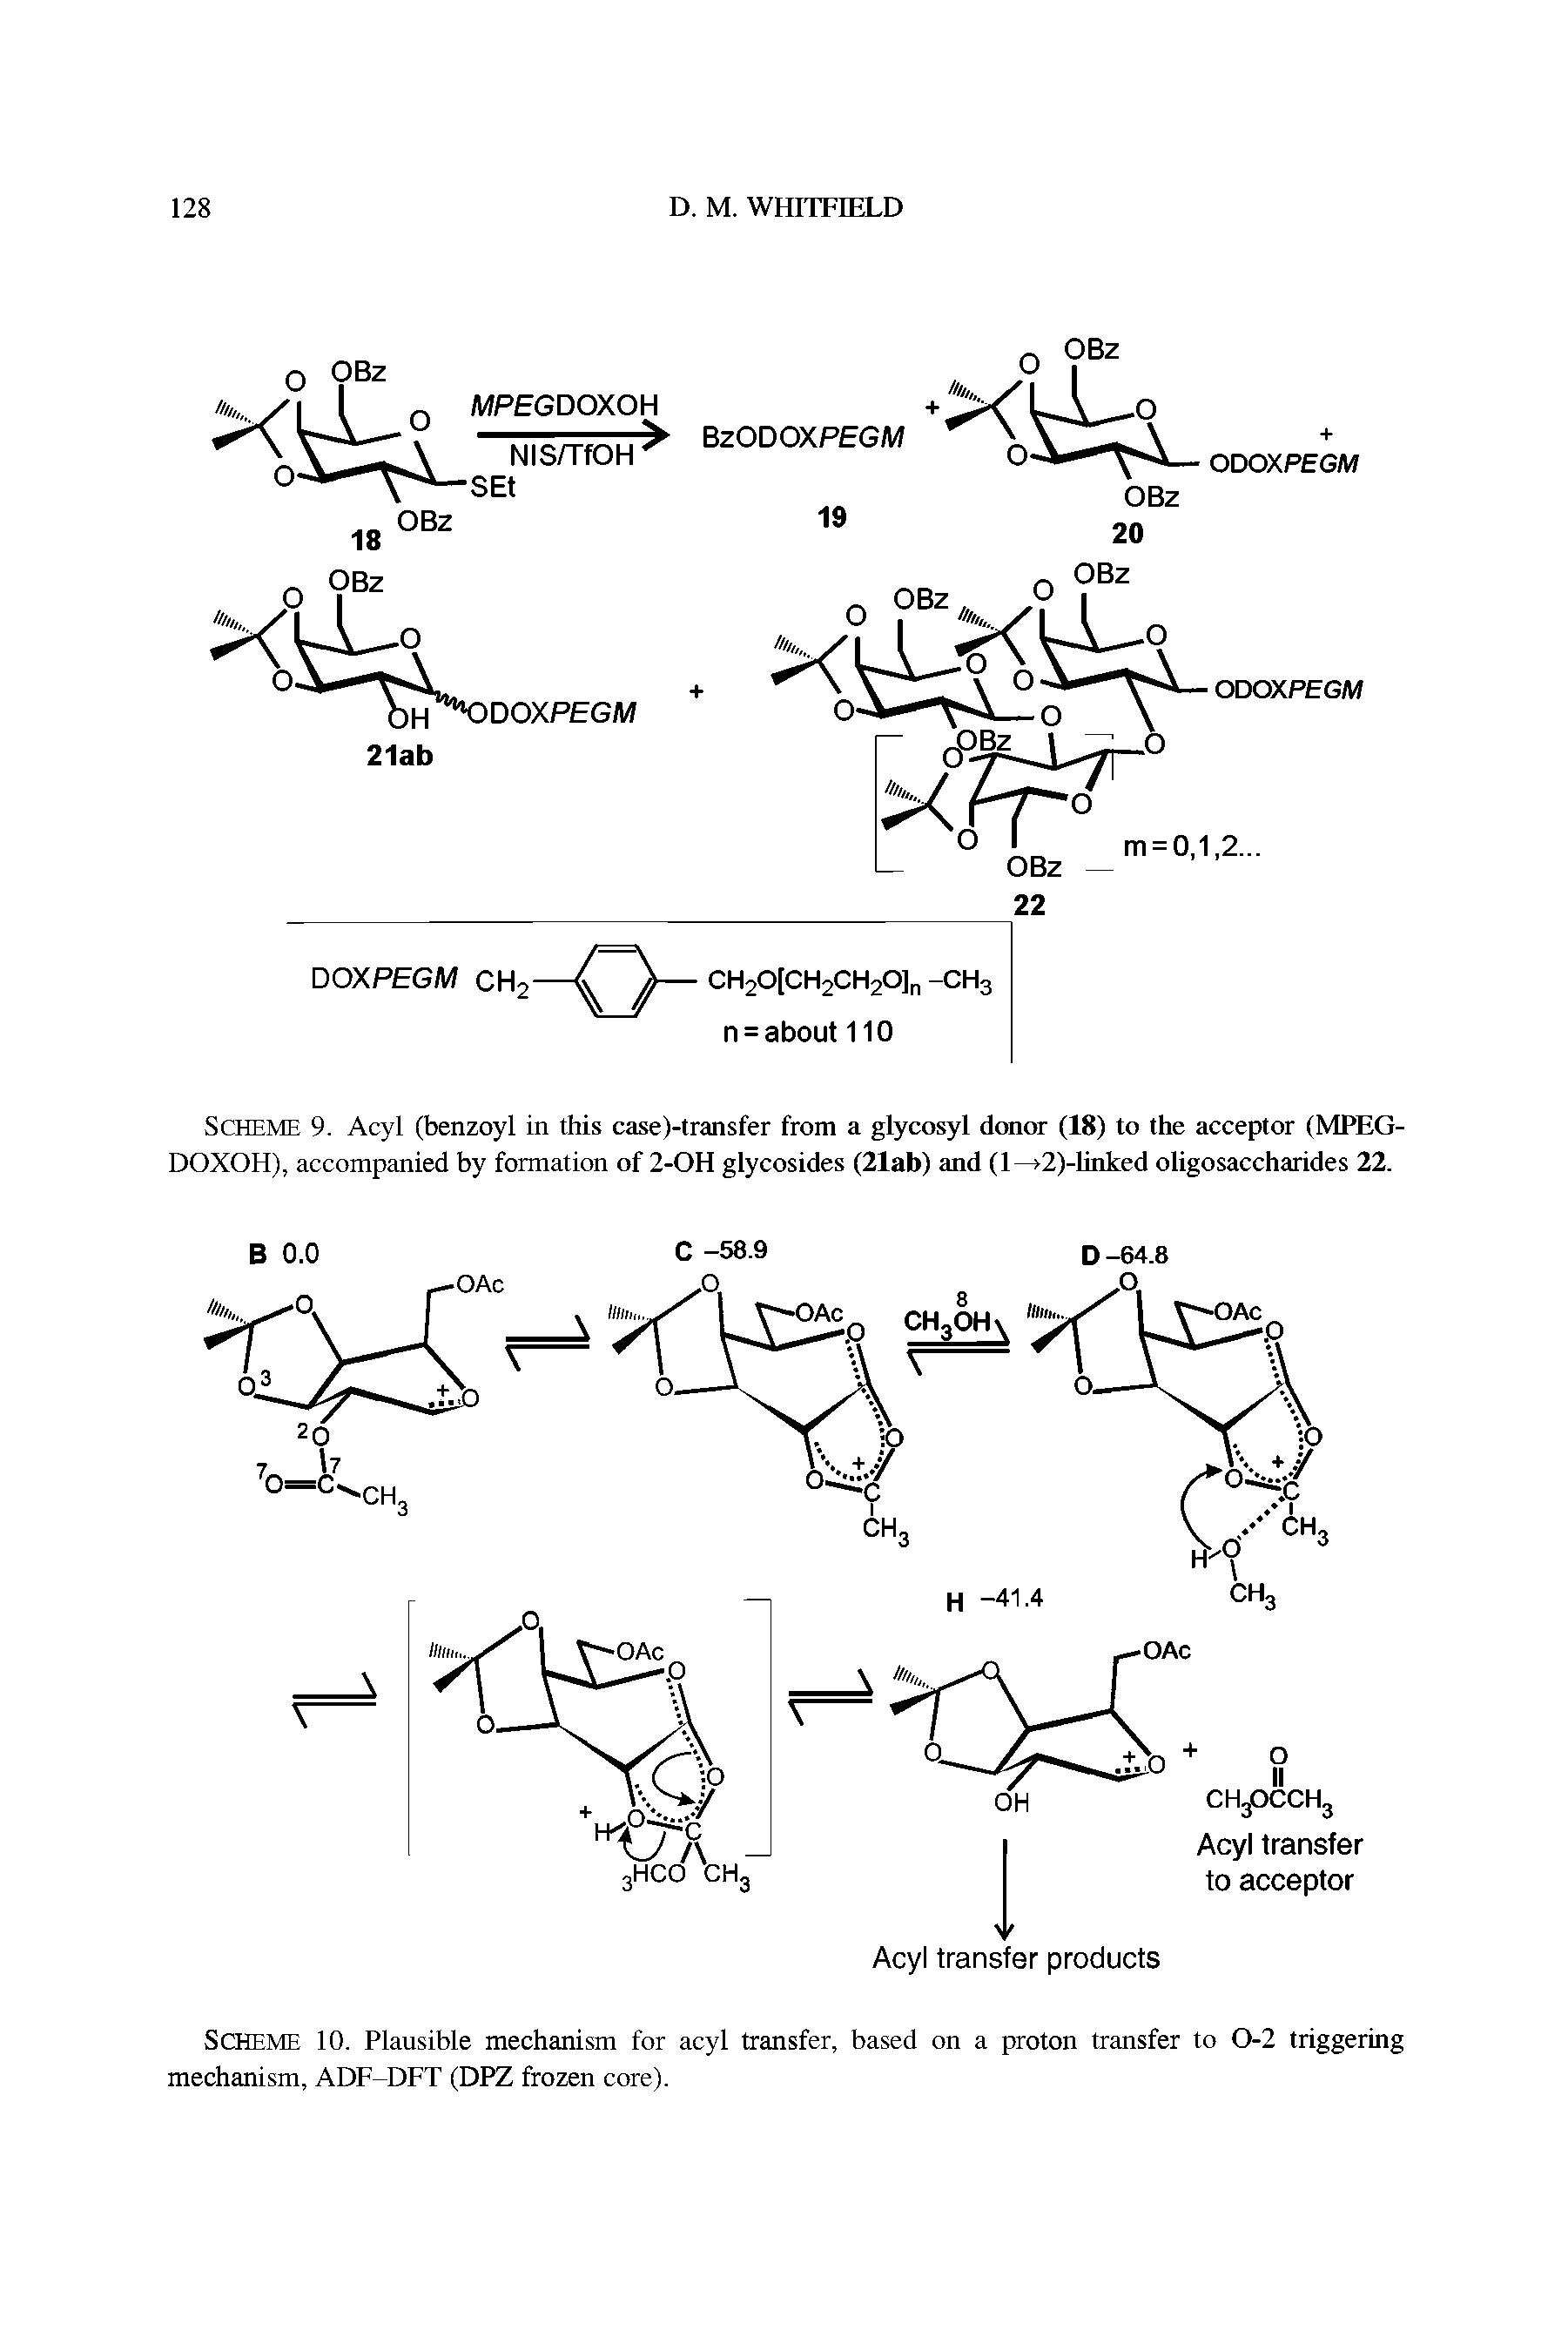 Scheme 9. Acyl (benzoyl in this case)-transfer from a glycosyl donor (18) to the acceptor (MPEG-DOXOH), accompanied by formation of 2-OH glycosides (21ab) and (I >2)-linkcd oligosaccharides 22.